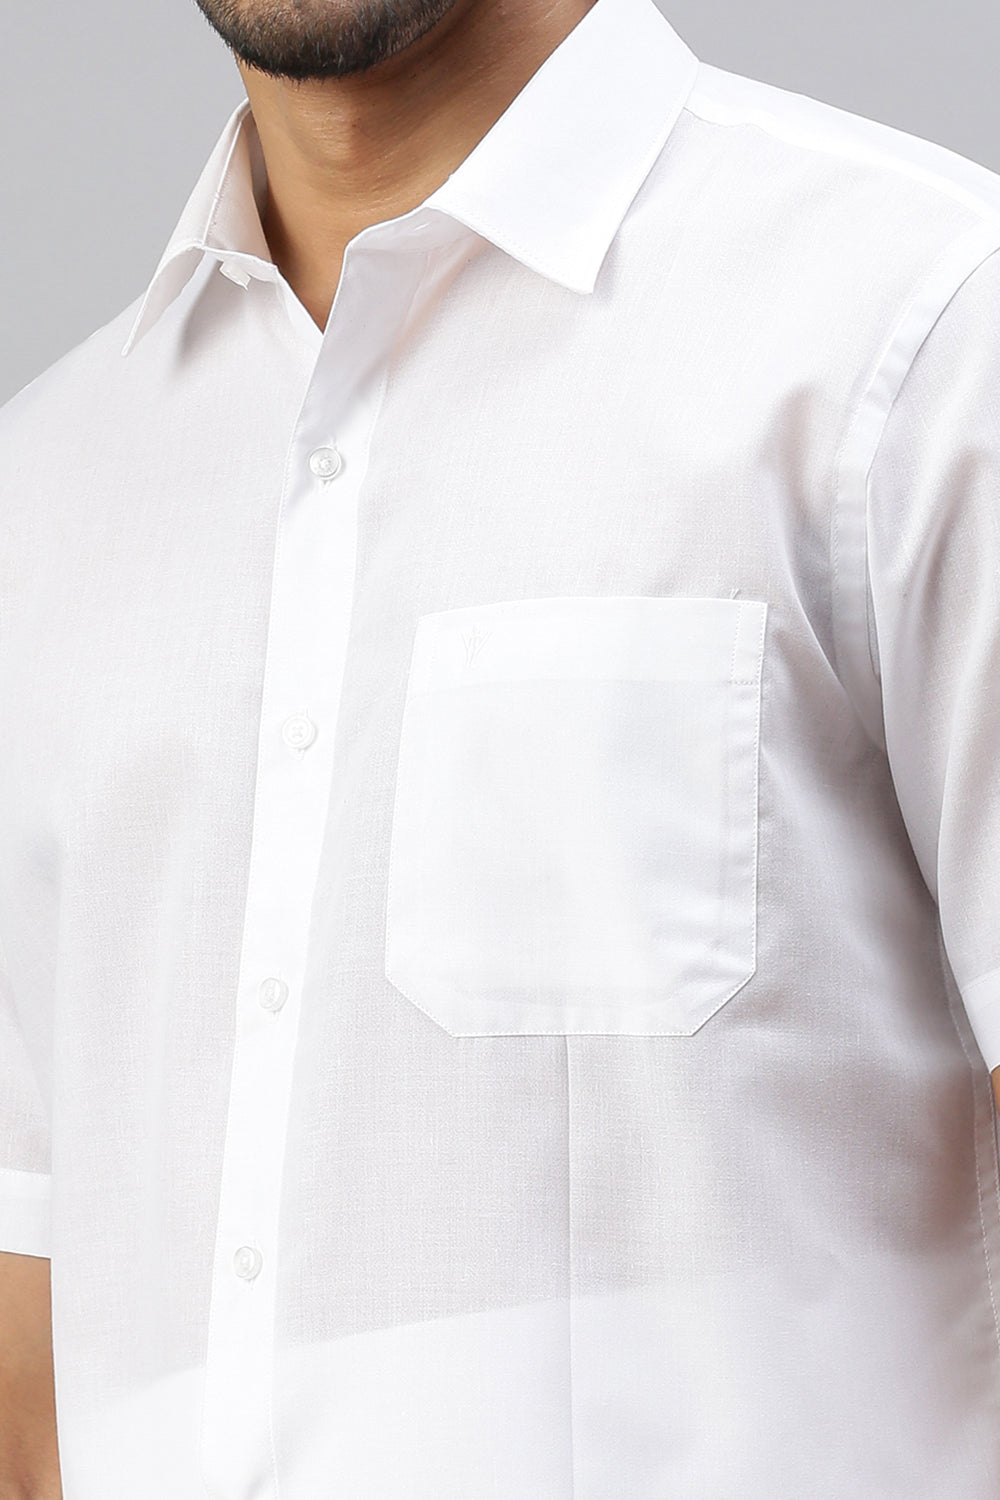 Mens 100% Cotton Half Sleeves White Shirt Justice White -Zoom view